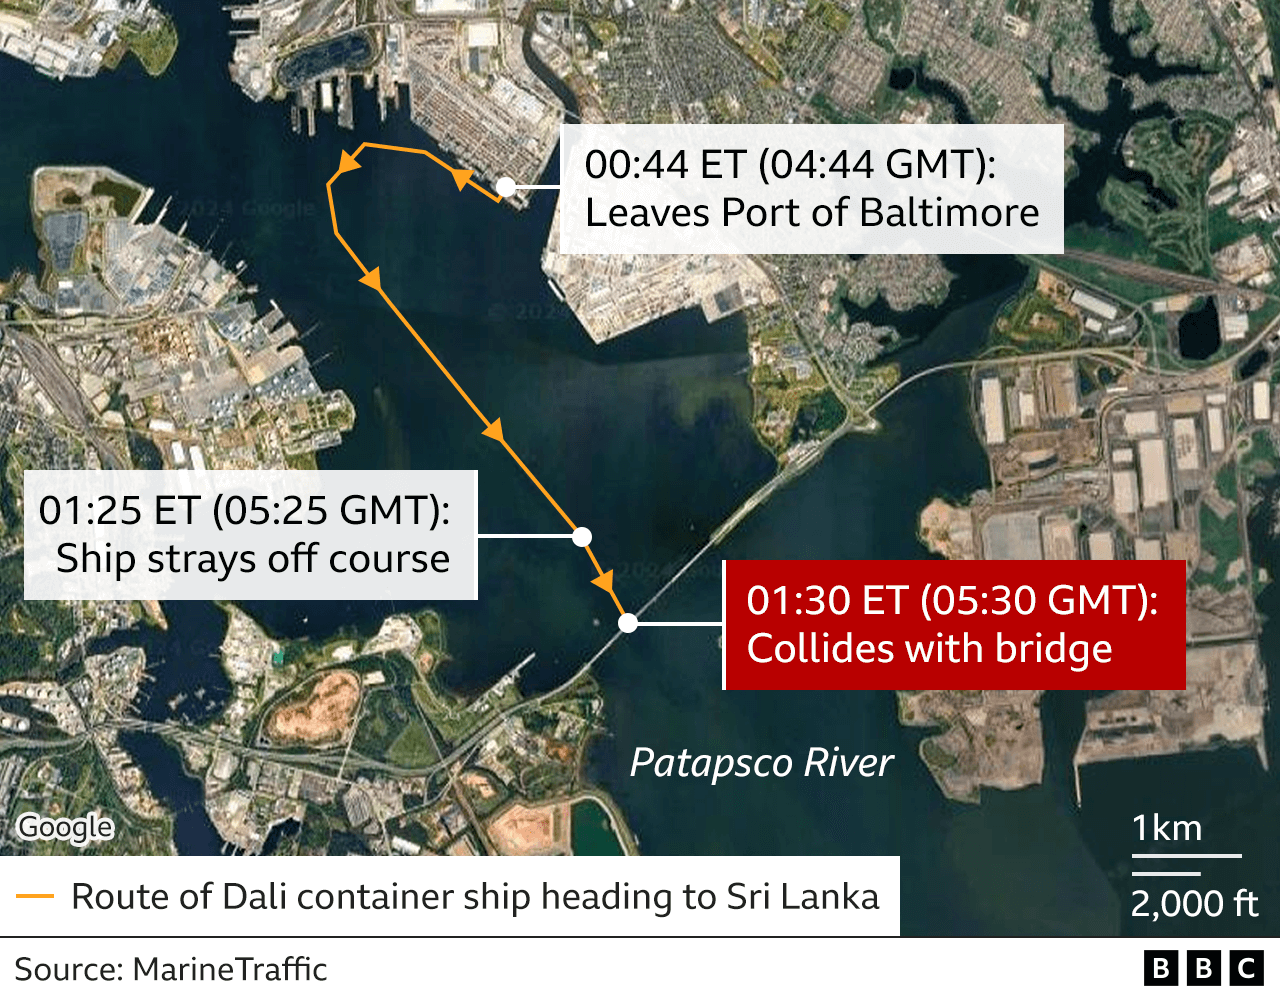 Map showing location of Baltimore bridge collapse and the ship's route